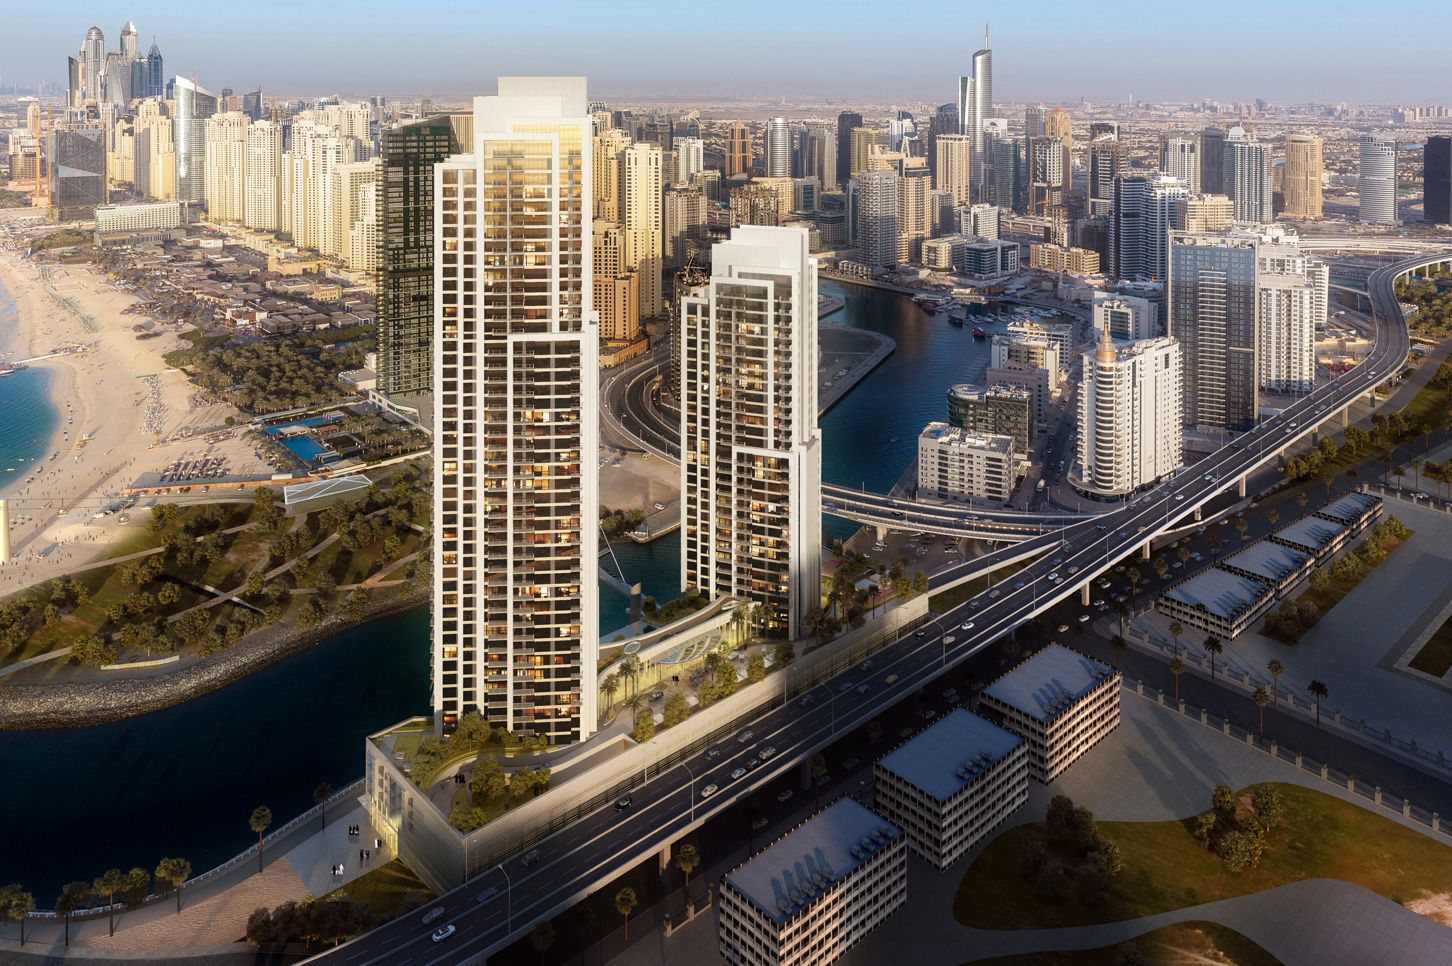 52-42 Tower - Limitless Valley - Real Estate - Dubai